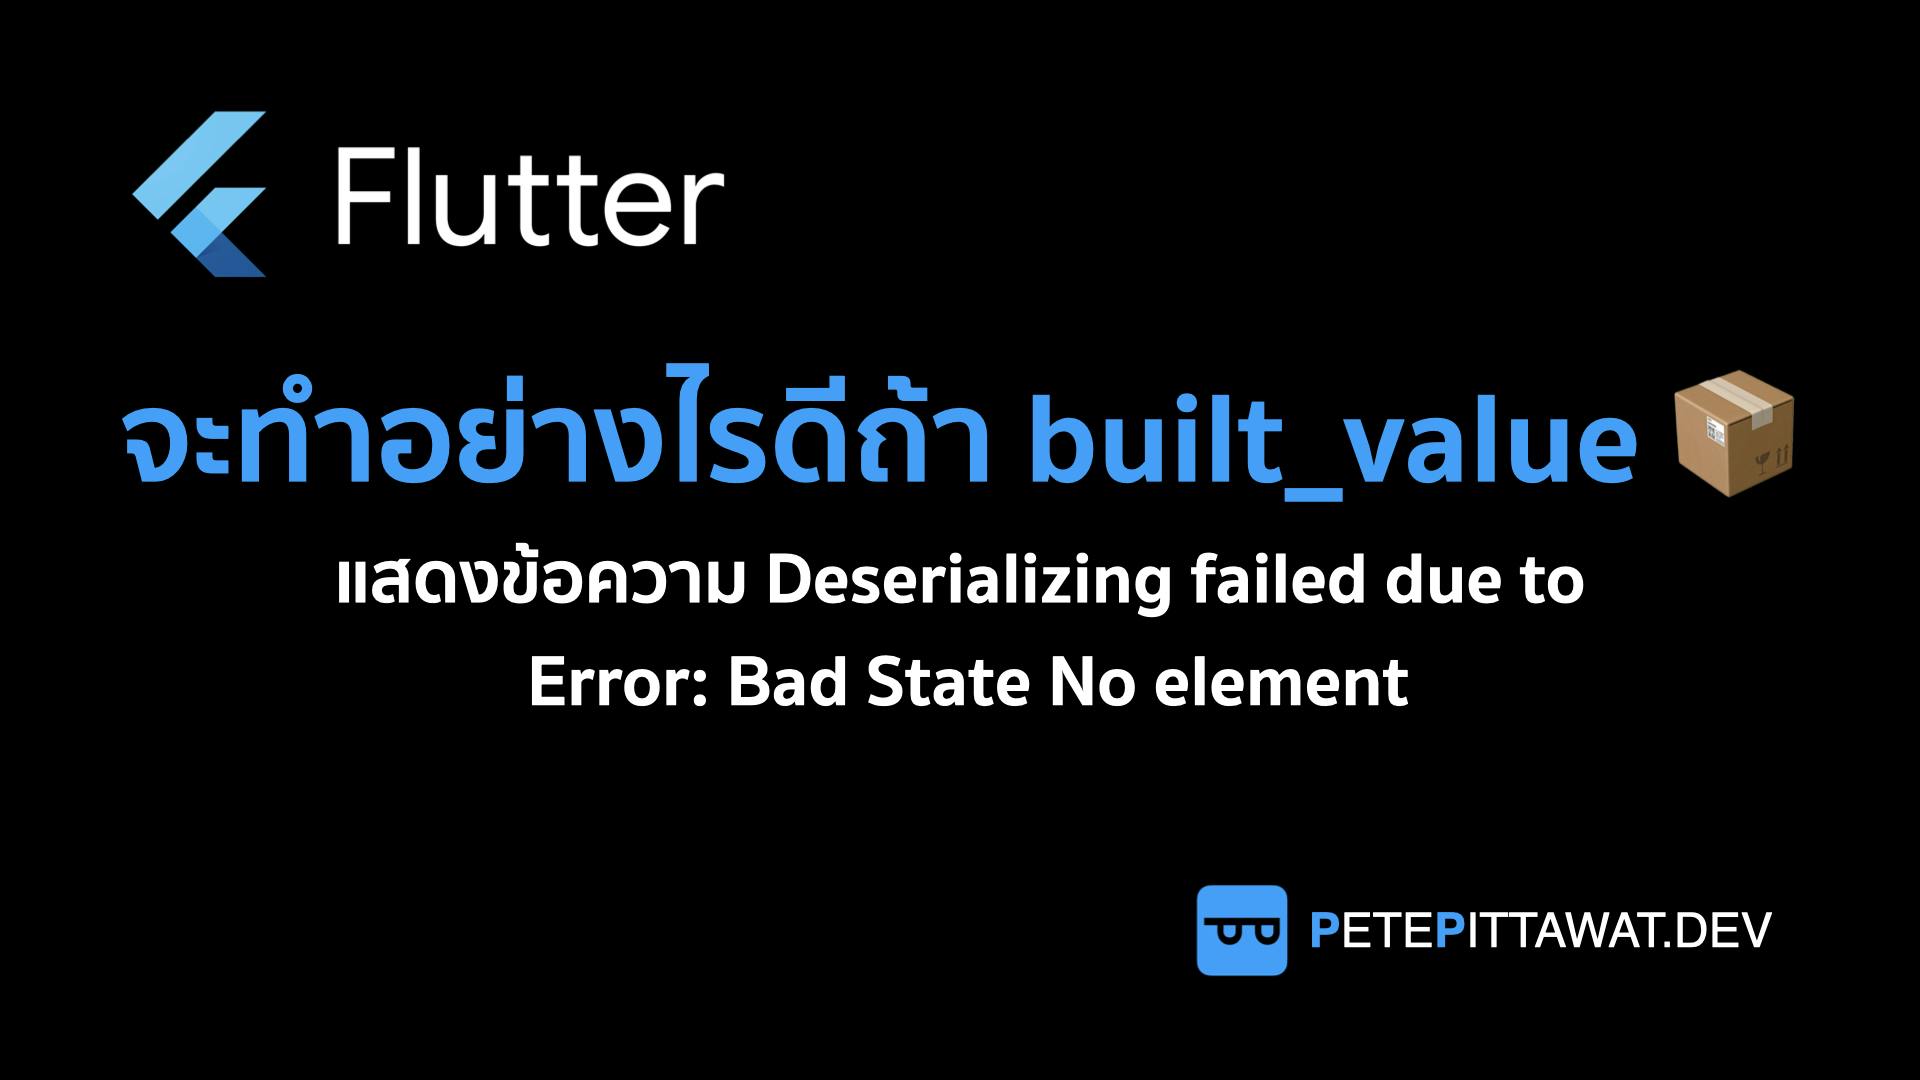 Cover Image for Flutter: วิธีแก้ปัญหาใช้ built_value แล้วเจอ Deserializing failed due to Error: Bad State No element